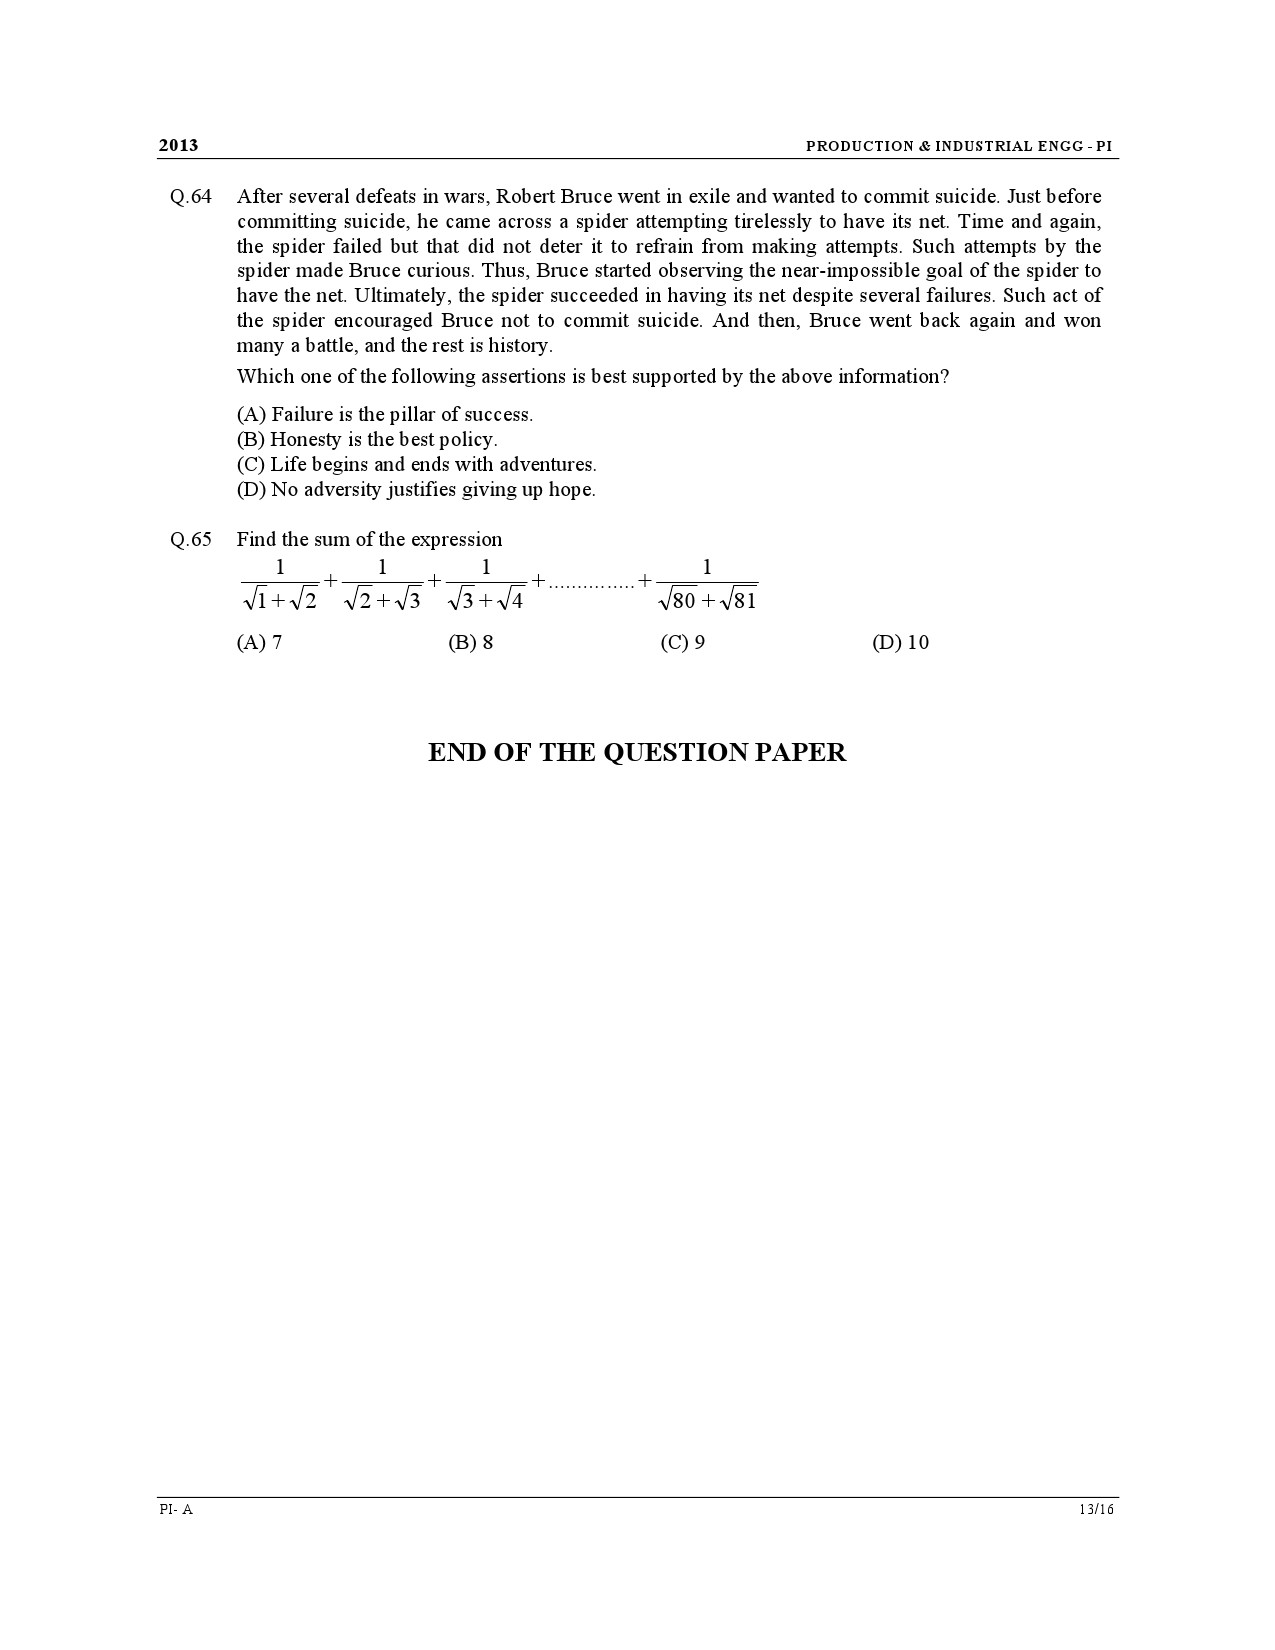 GATE Exam Question Paper 2013 Production and Industrial Engineering 13